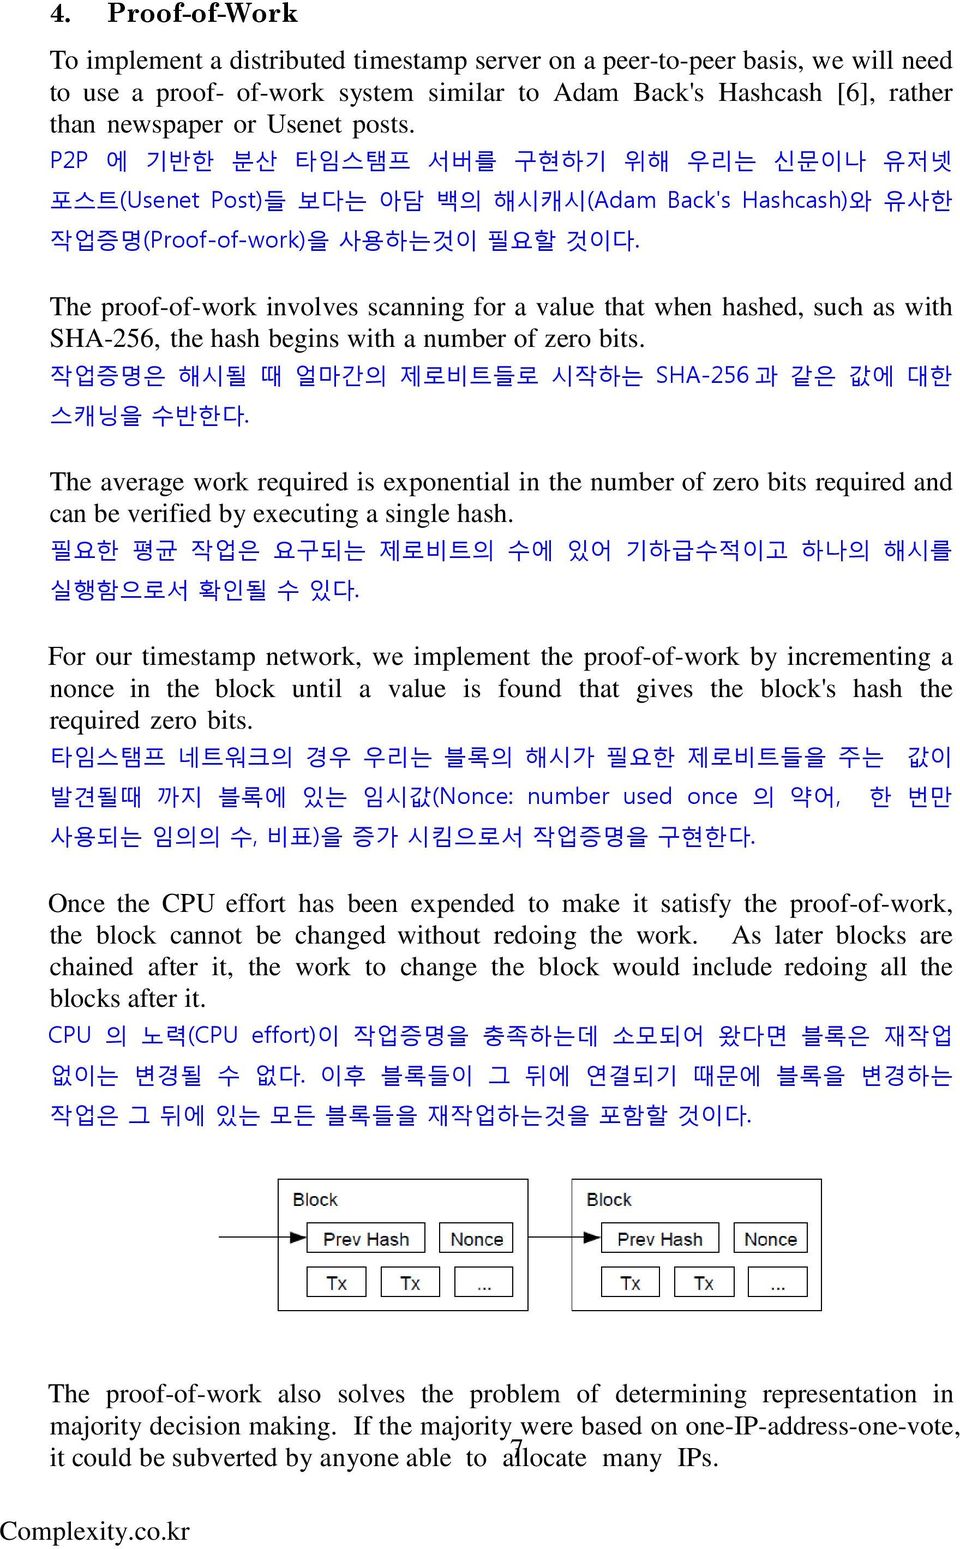 The proof-of-work involves scanning for a value that when hashed, such as with SHA-256, the hash begins with a number of zero bits. 작업증명은 해시될 때 얼마갂의 제로비트들로 시작하는 SHA-256 과 같은 값에 대핚 스캐닝을 수반핚다.